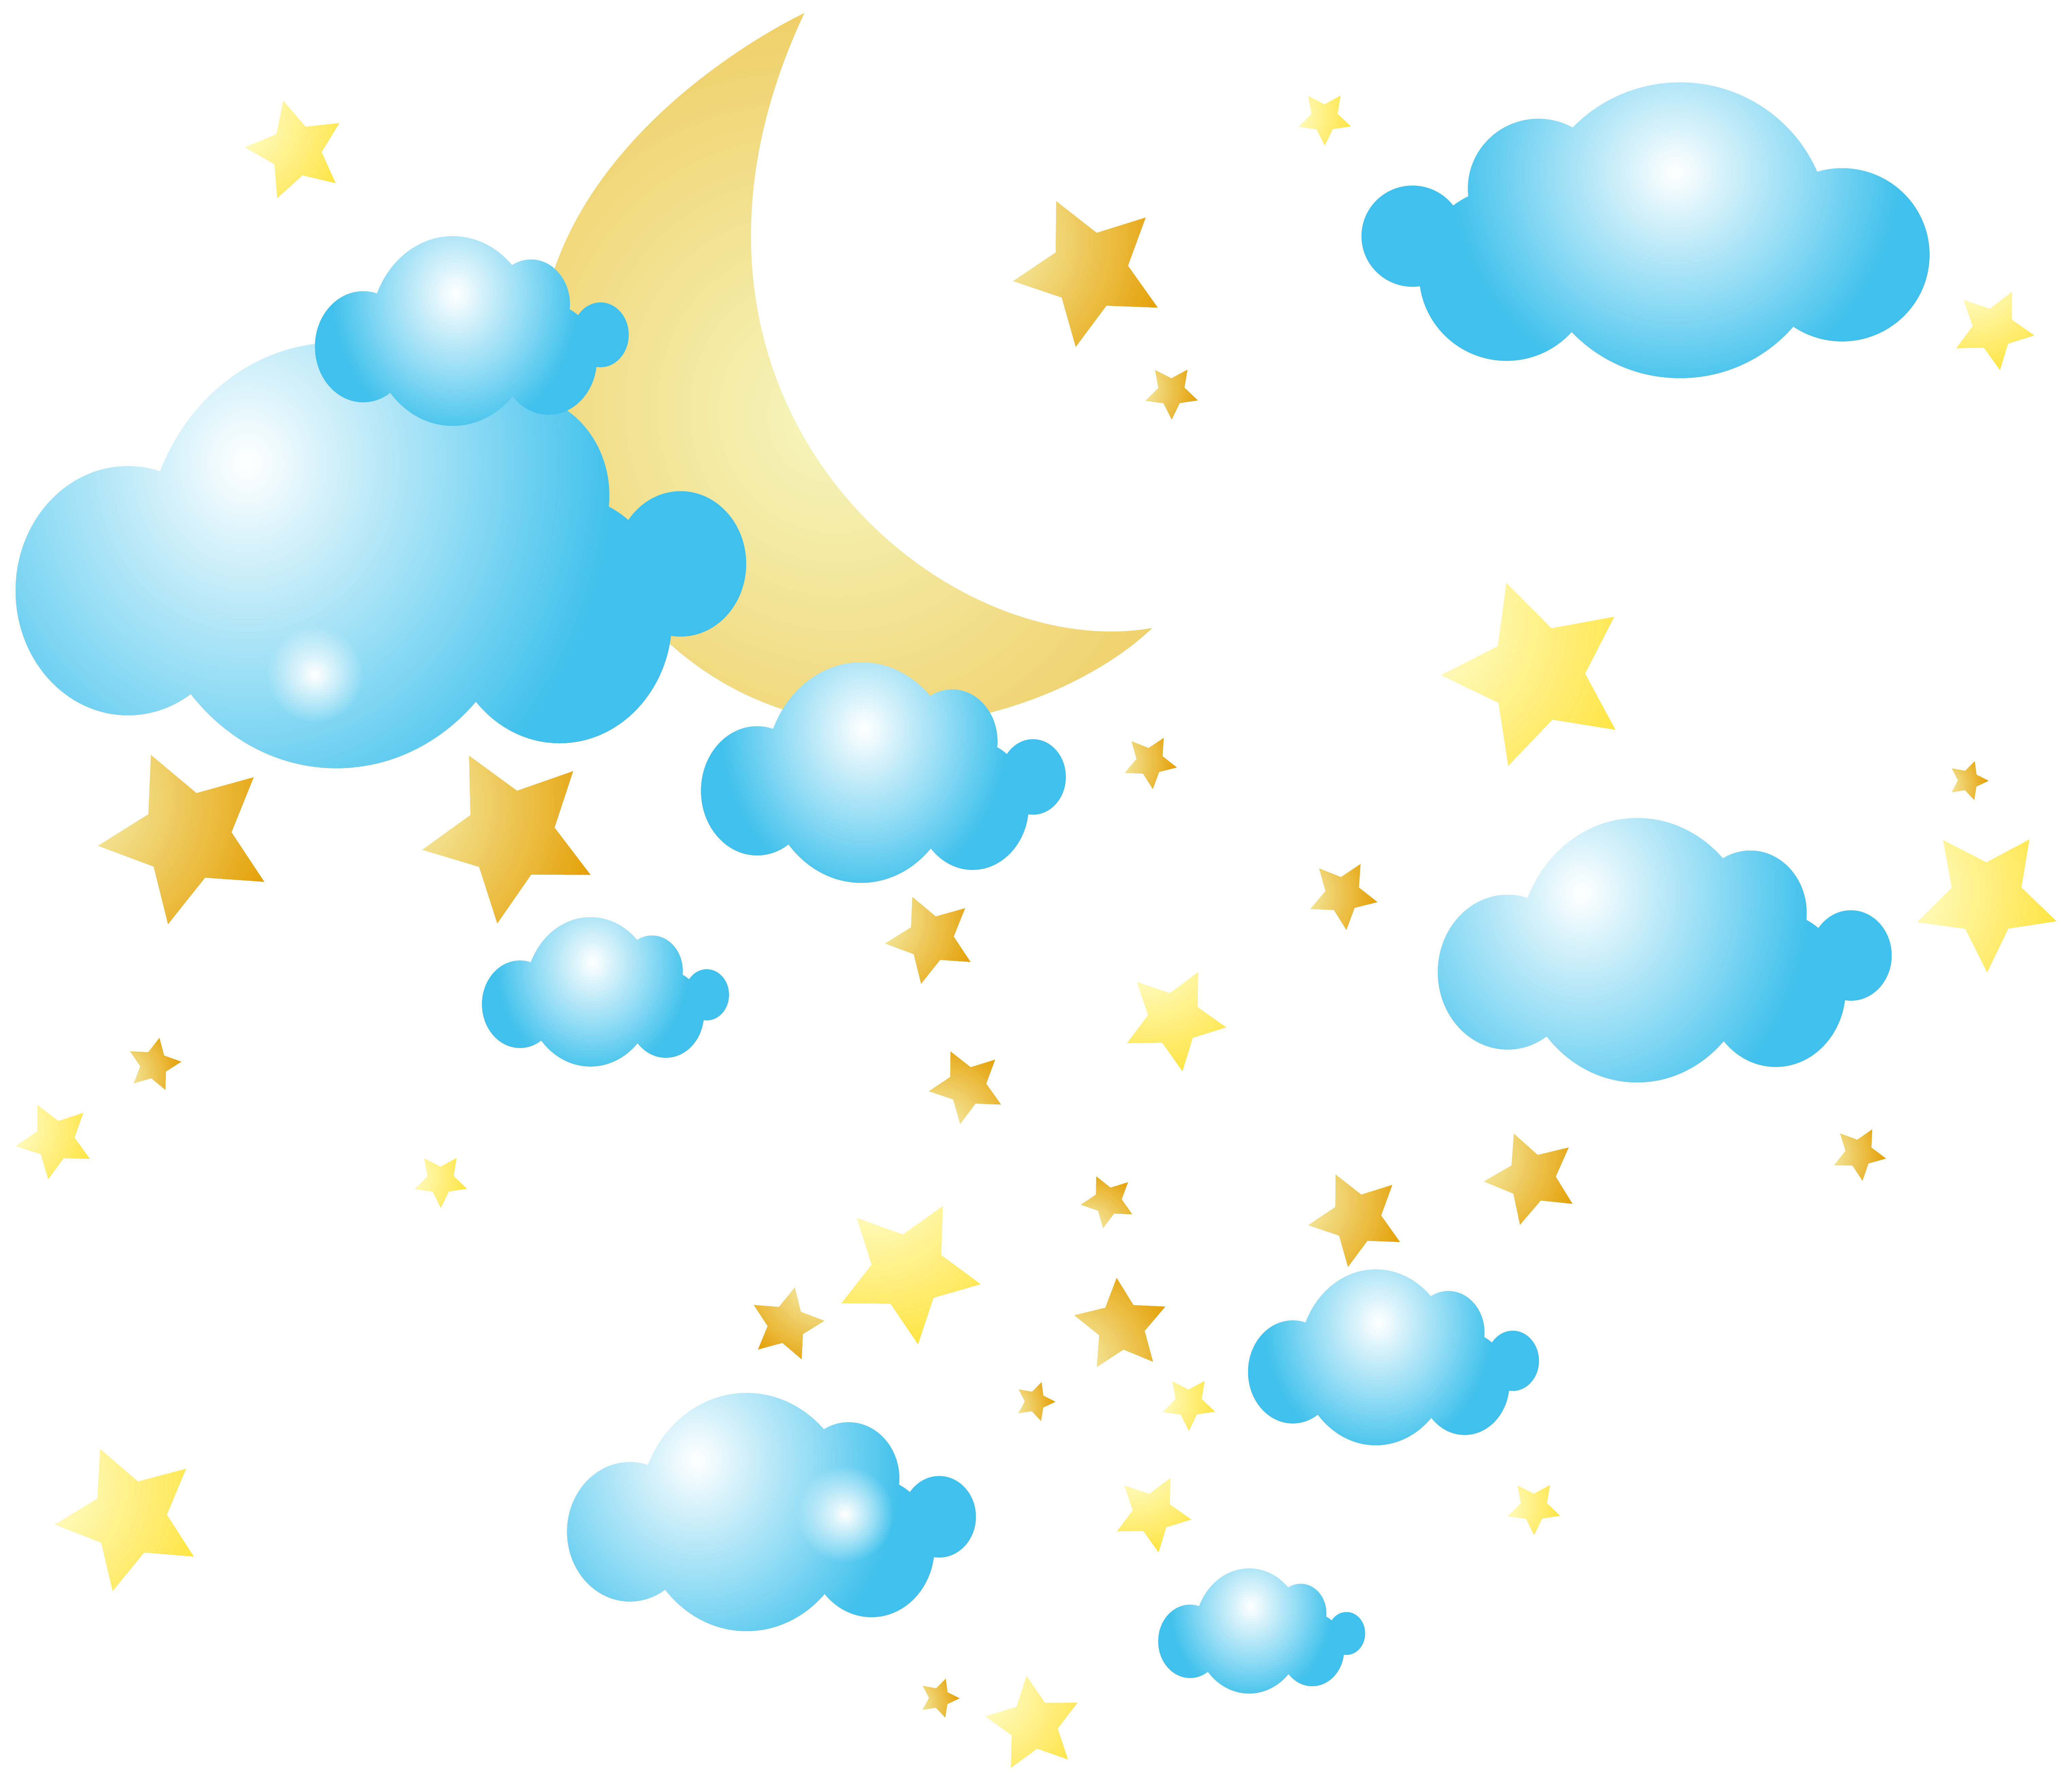 Moon clouds and stars. Star clip art star pattern